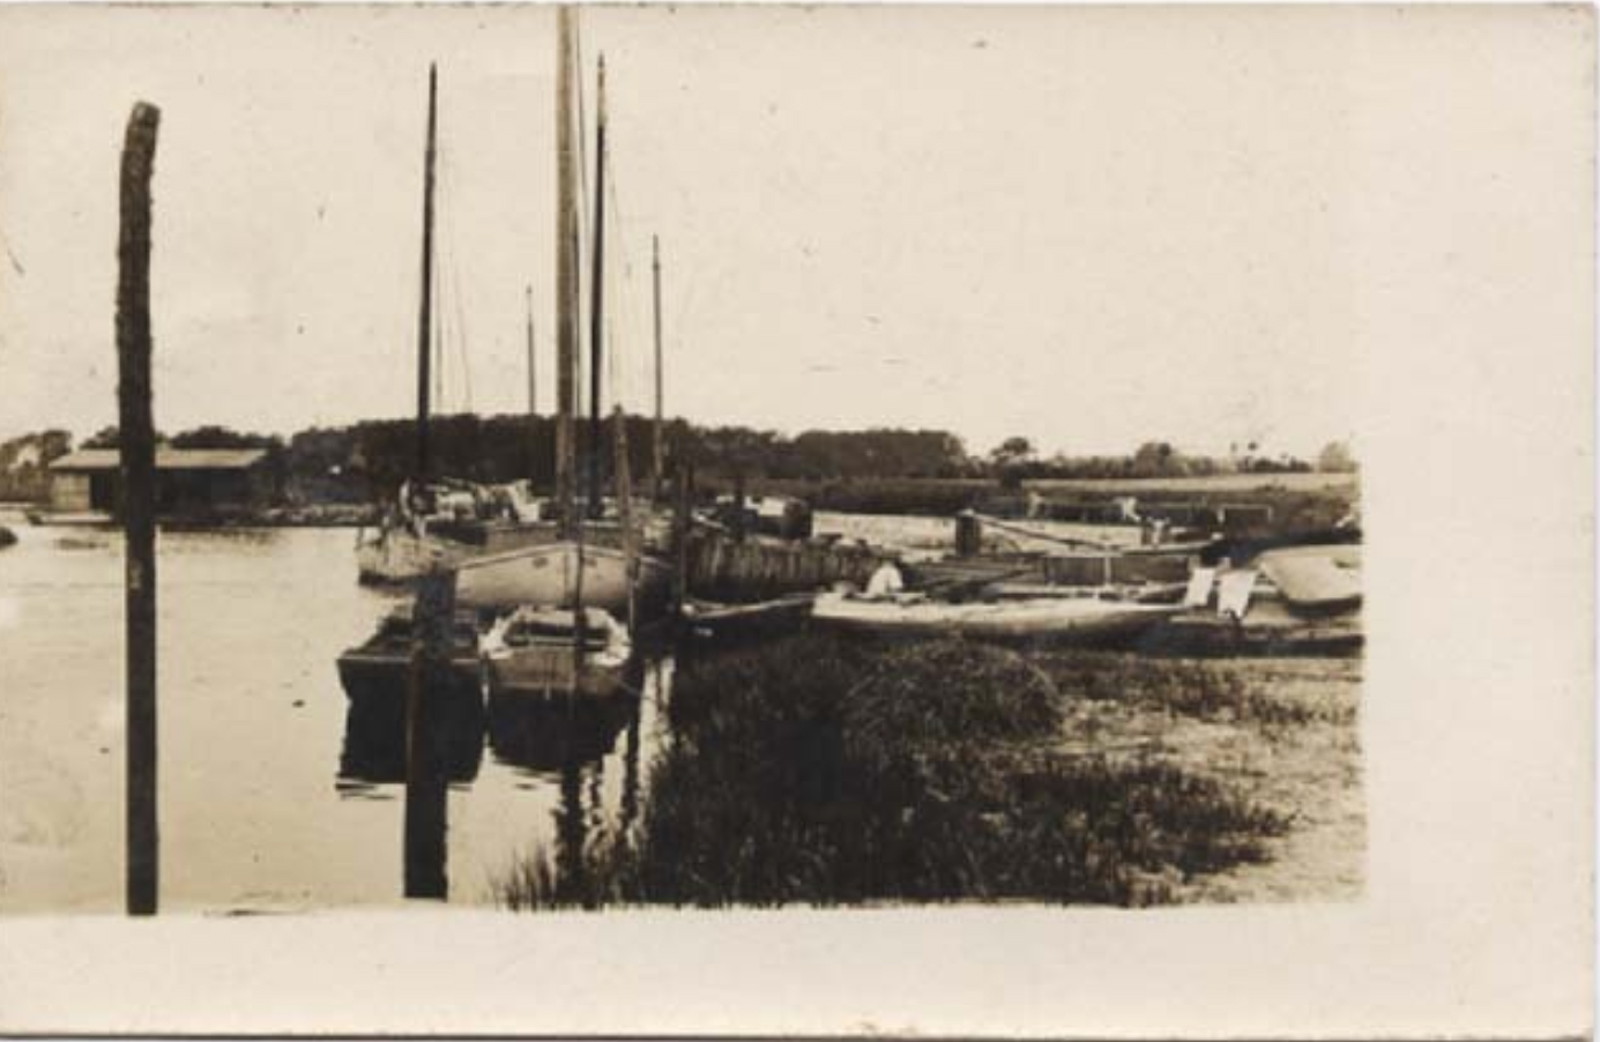 Absecon - Boats in the harbor - c 1910